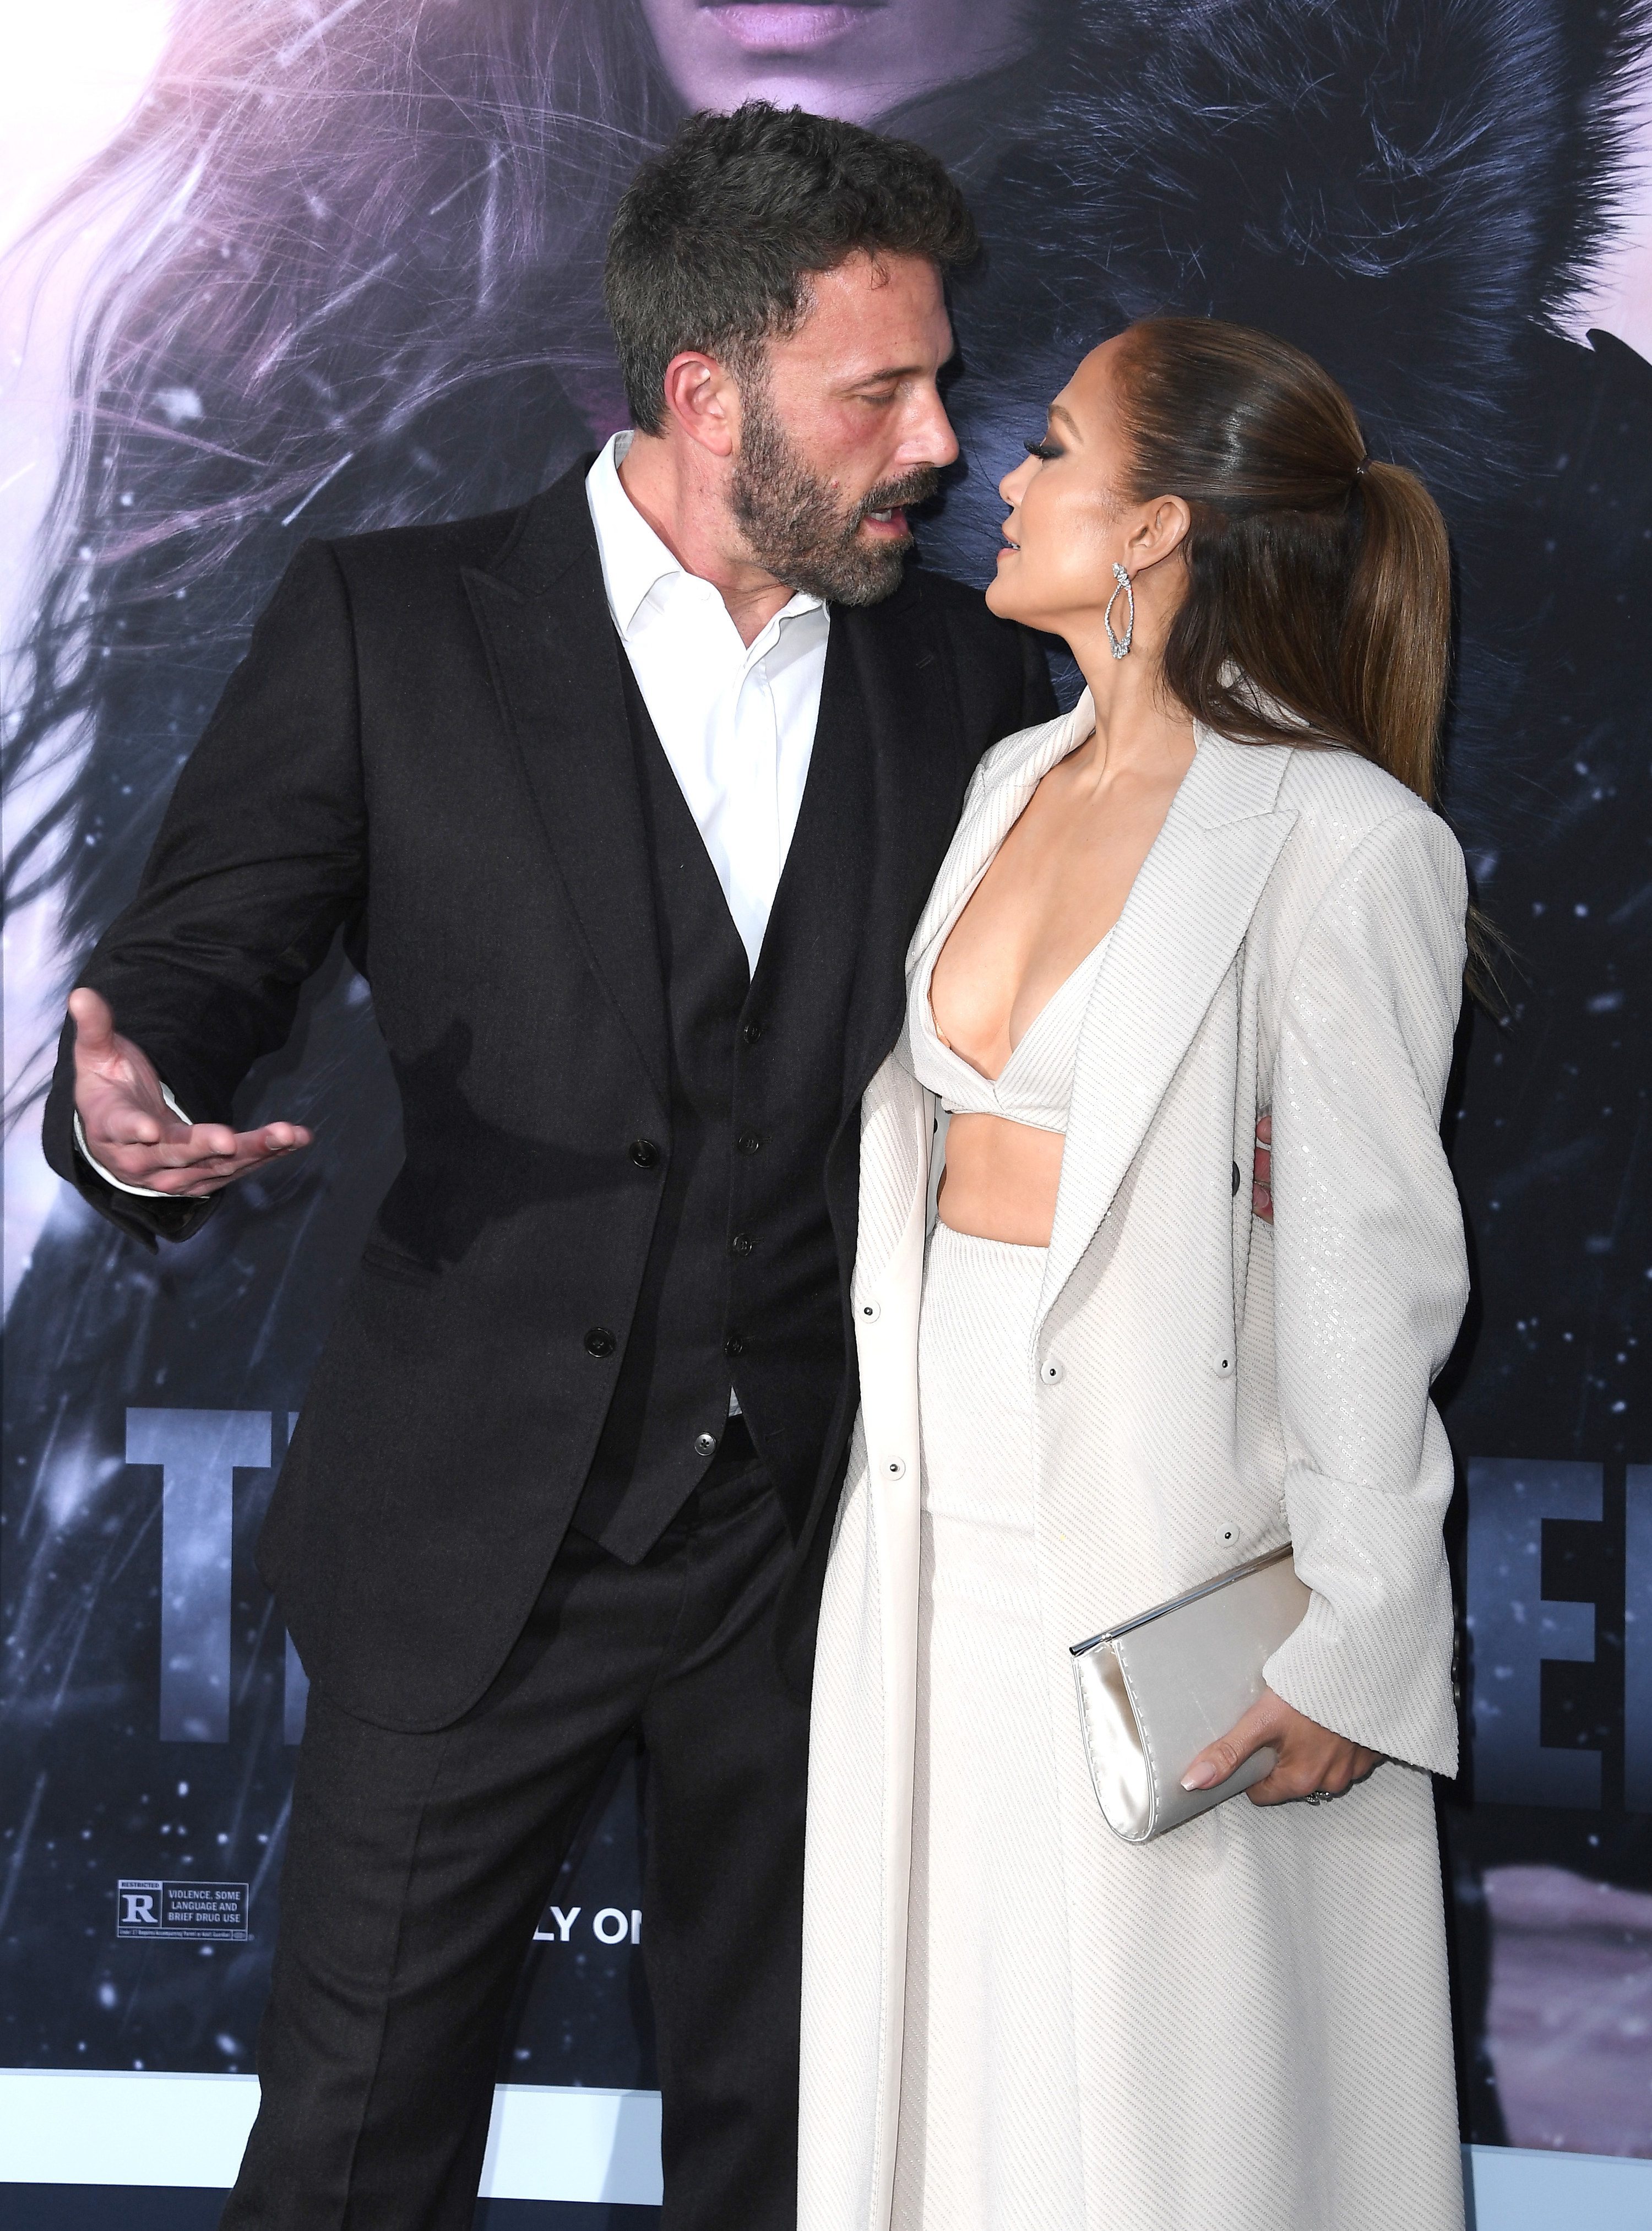 Ben and JLo looking at each other tensely